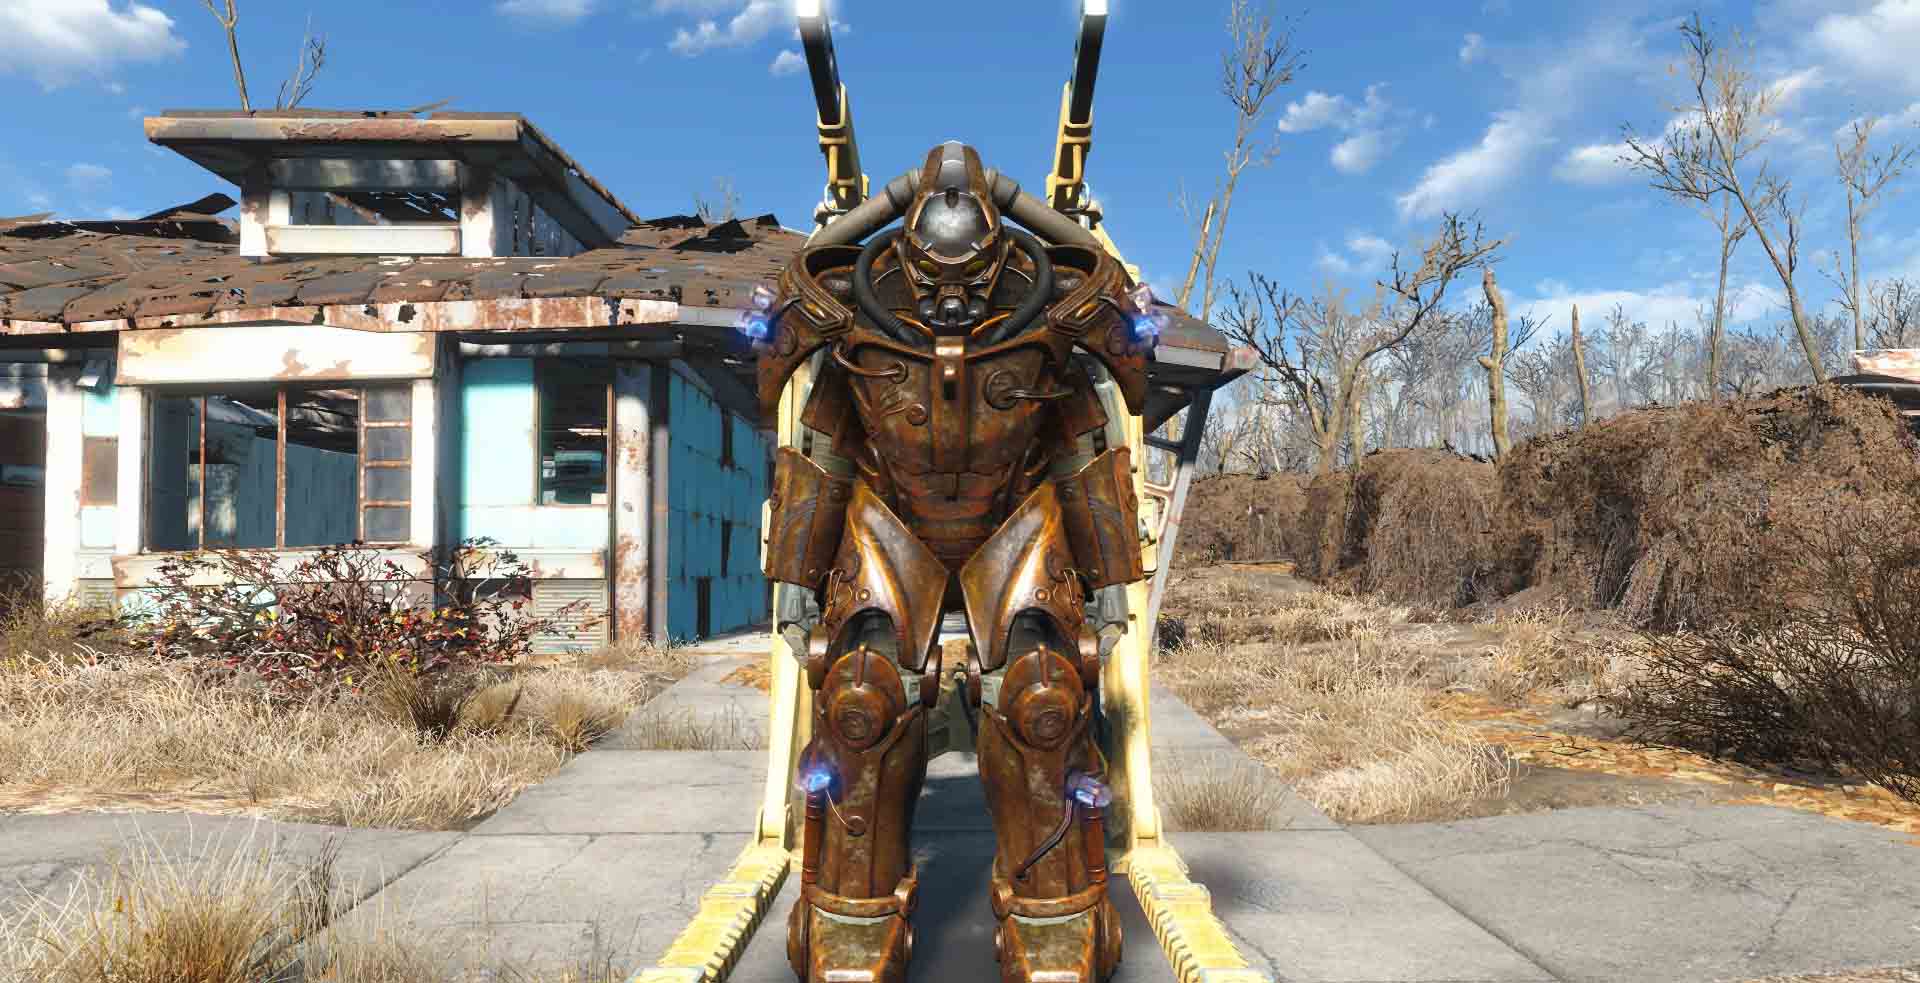 Fallout 4: How to Get X-02 Power Armor